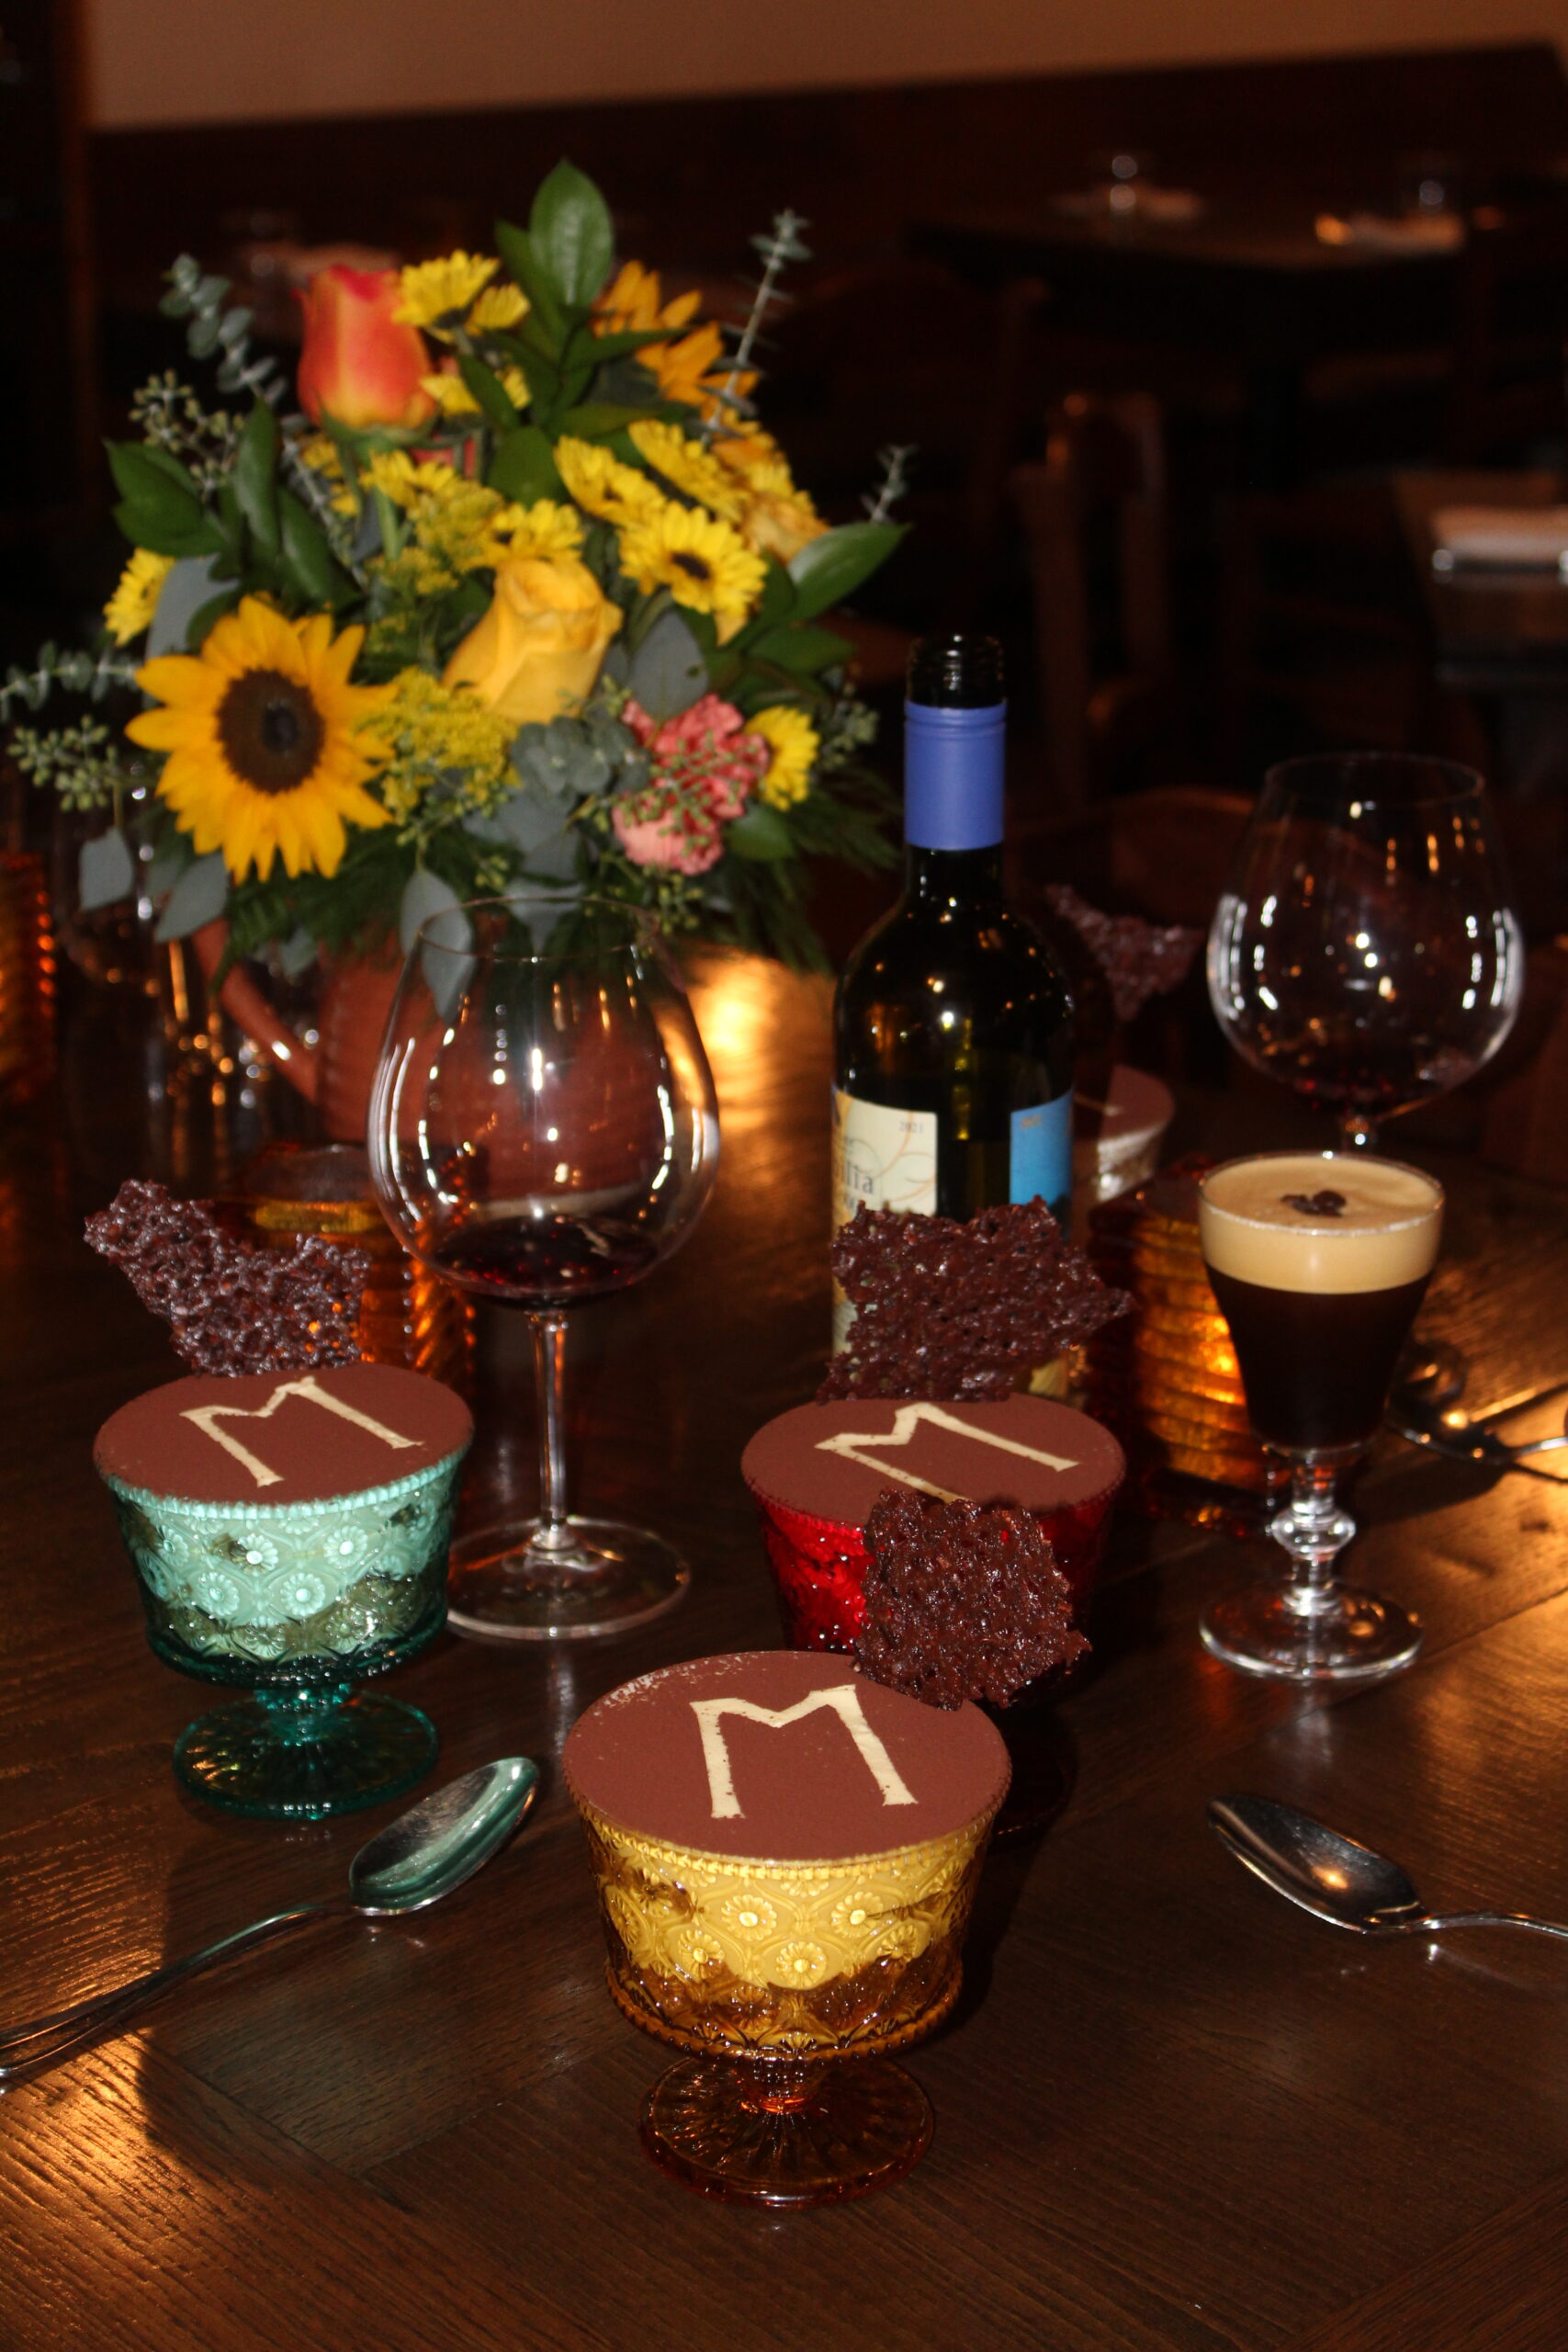 a table with flowers, tiramisu, espresso martinis, and glasses of wine